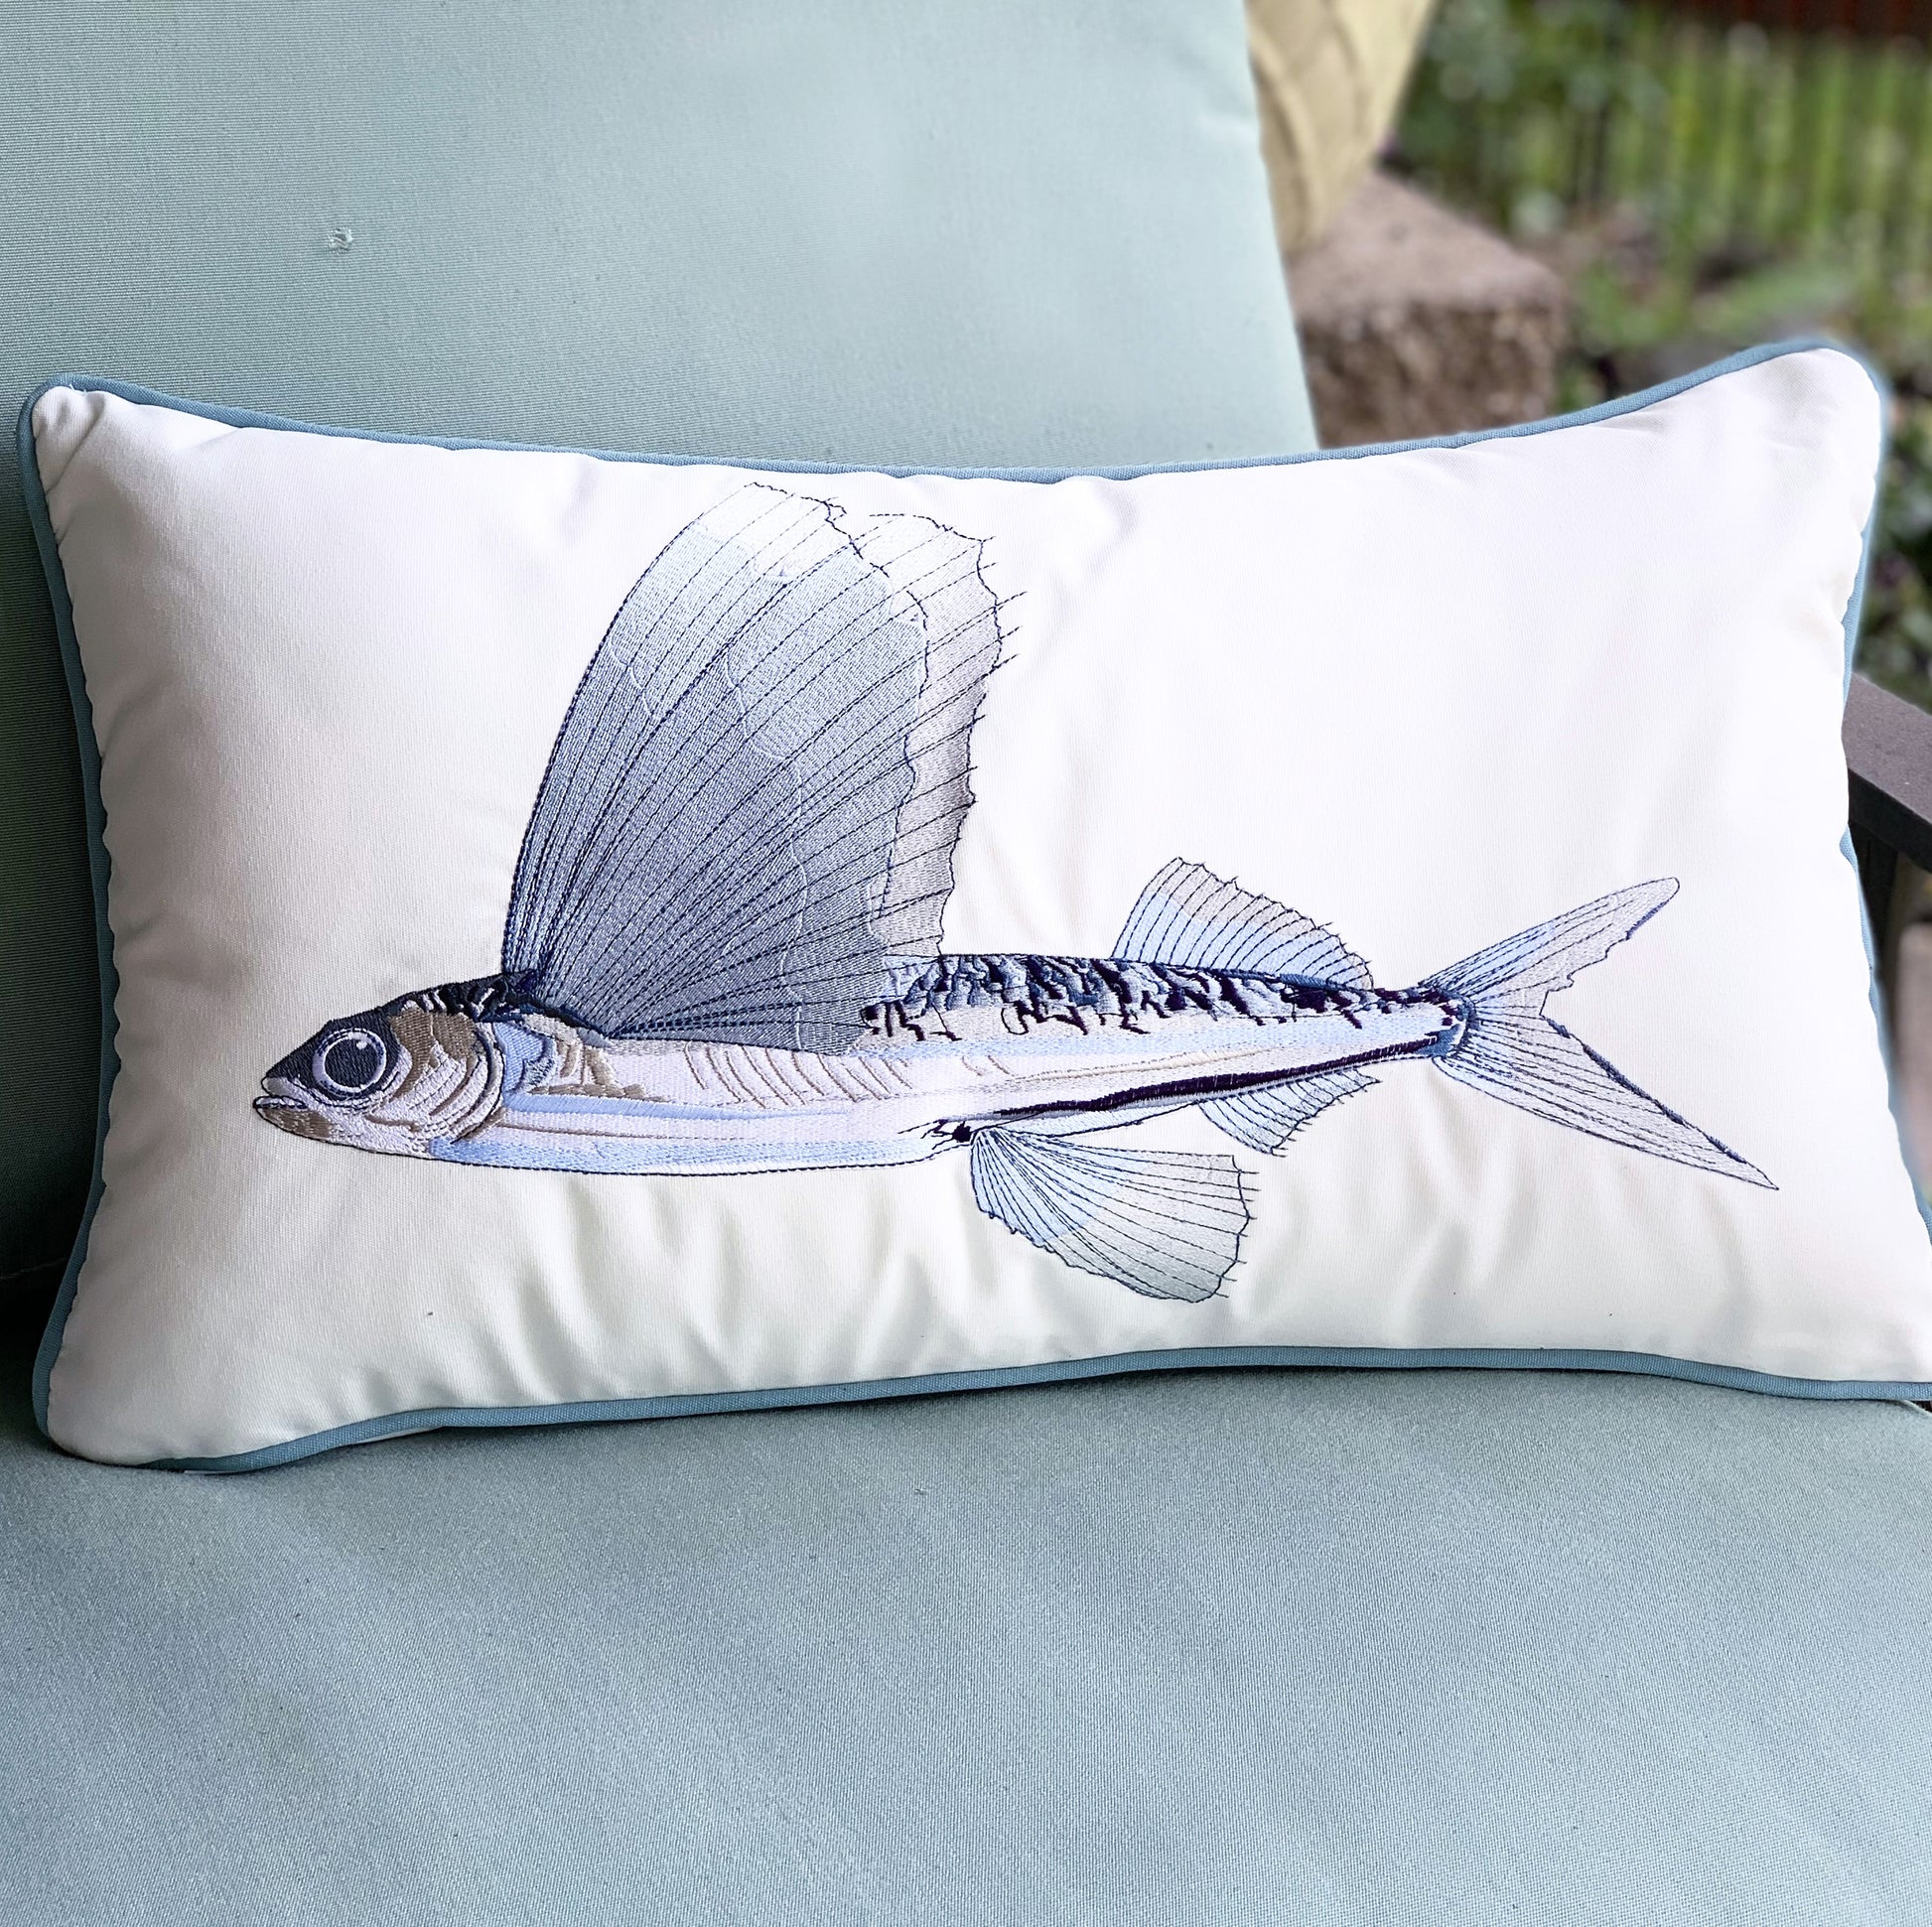 Can't Catch Me Flying Fish pillow styled on an outdoor chair.